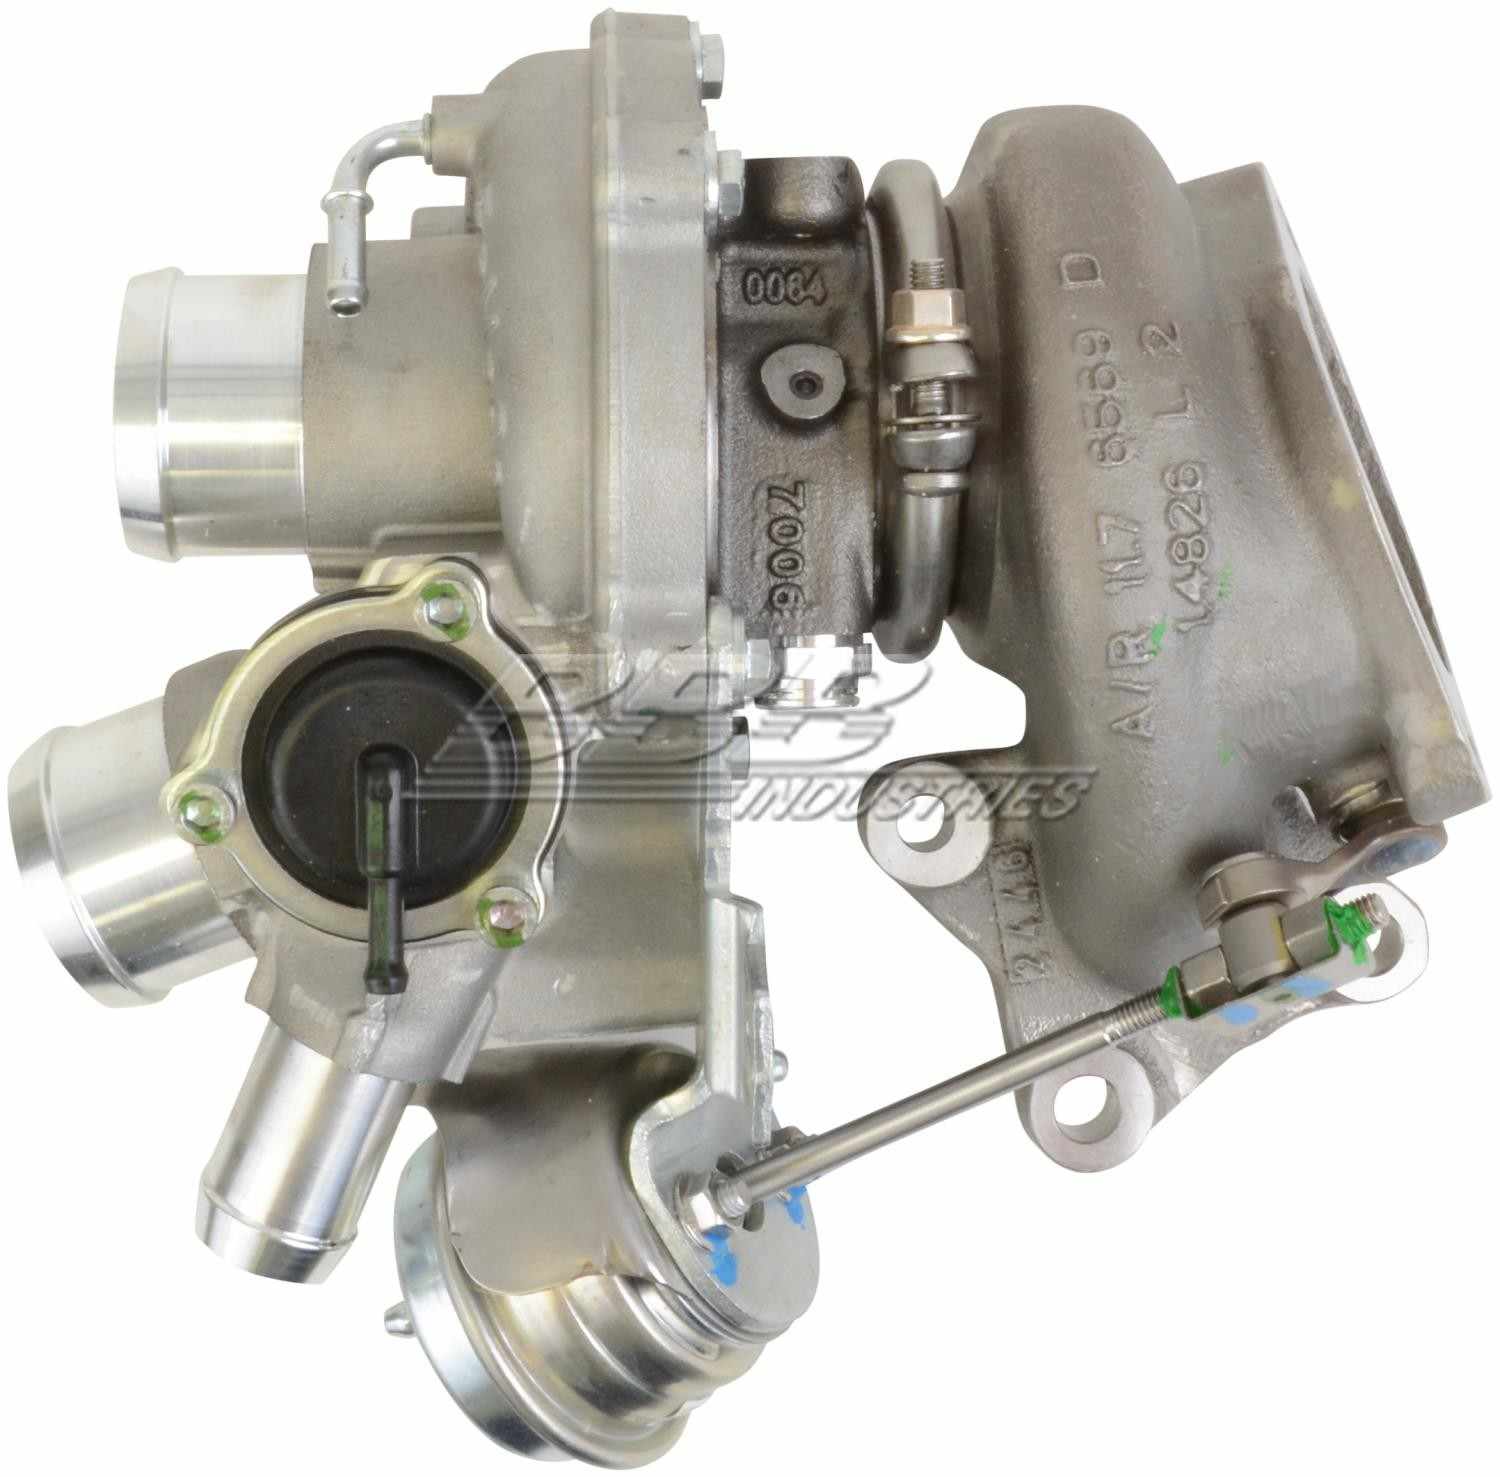 OE-TurboPower Remanufactured Turbocharger  top view frsport G1015